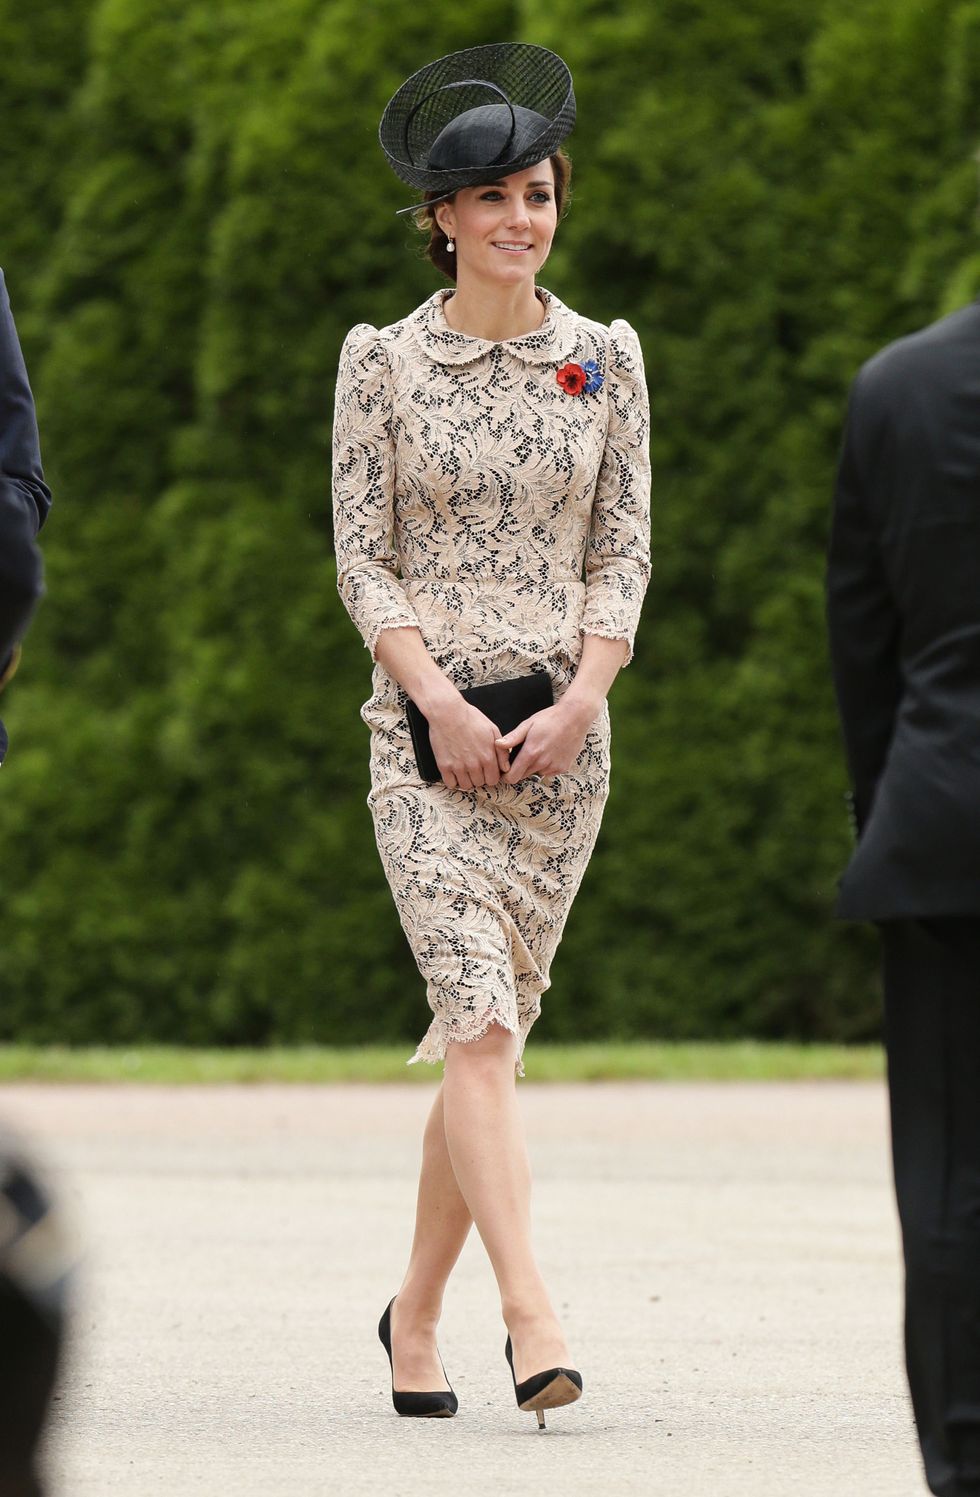 Kate Middleton wearing a cream and black lace dress